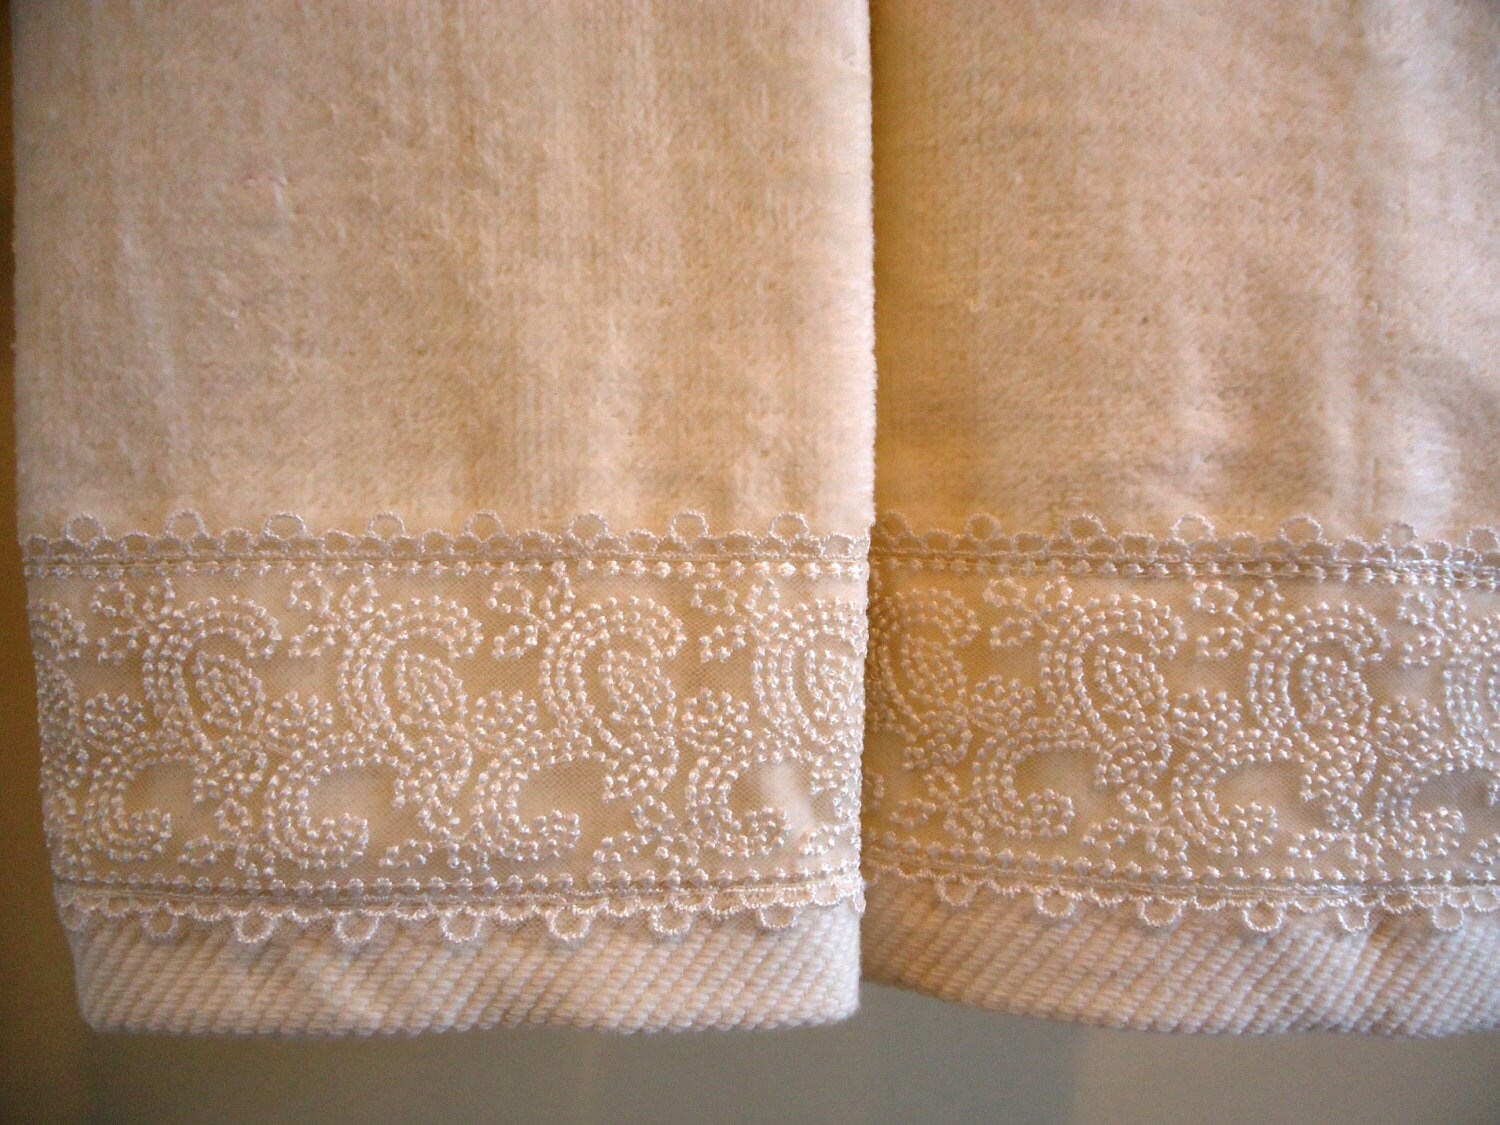 2 PINK ROSE Fingertip/Guest Towel set WHITE Velour Cotton by UtaLace NEW 